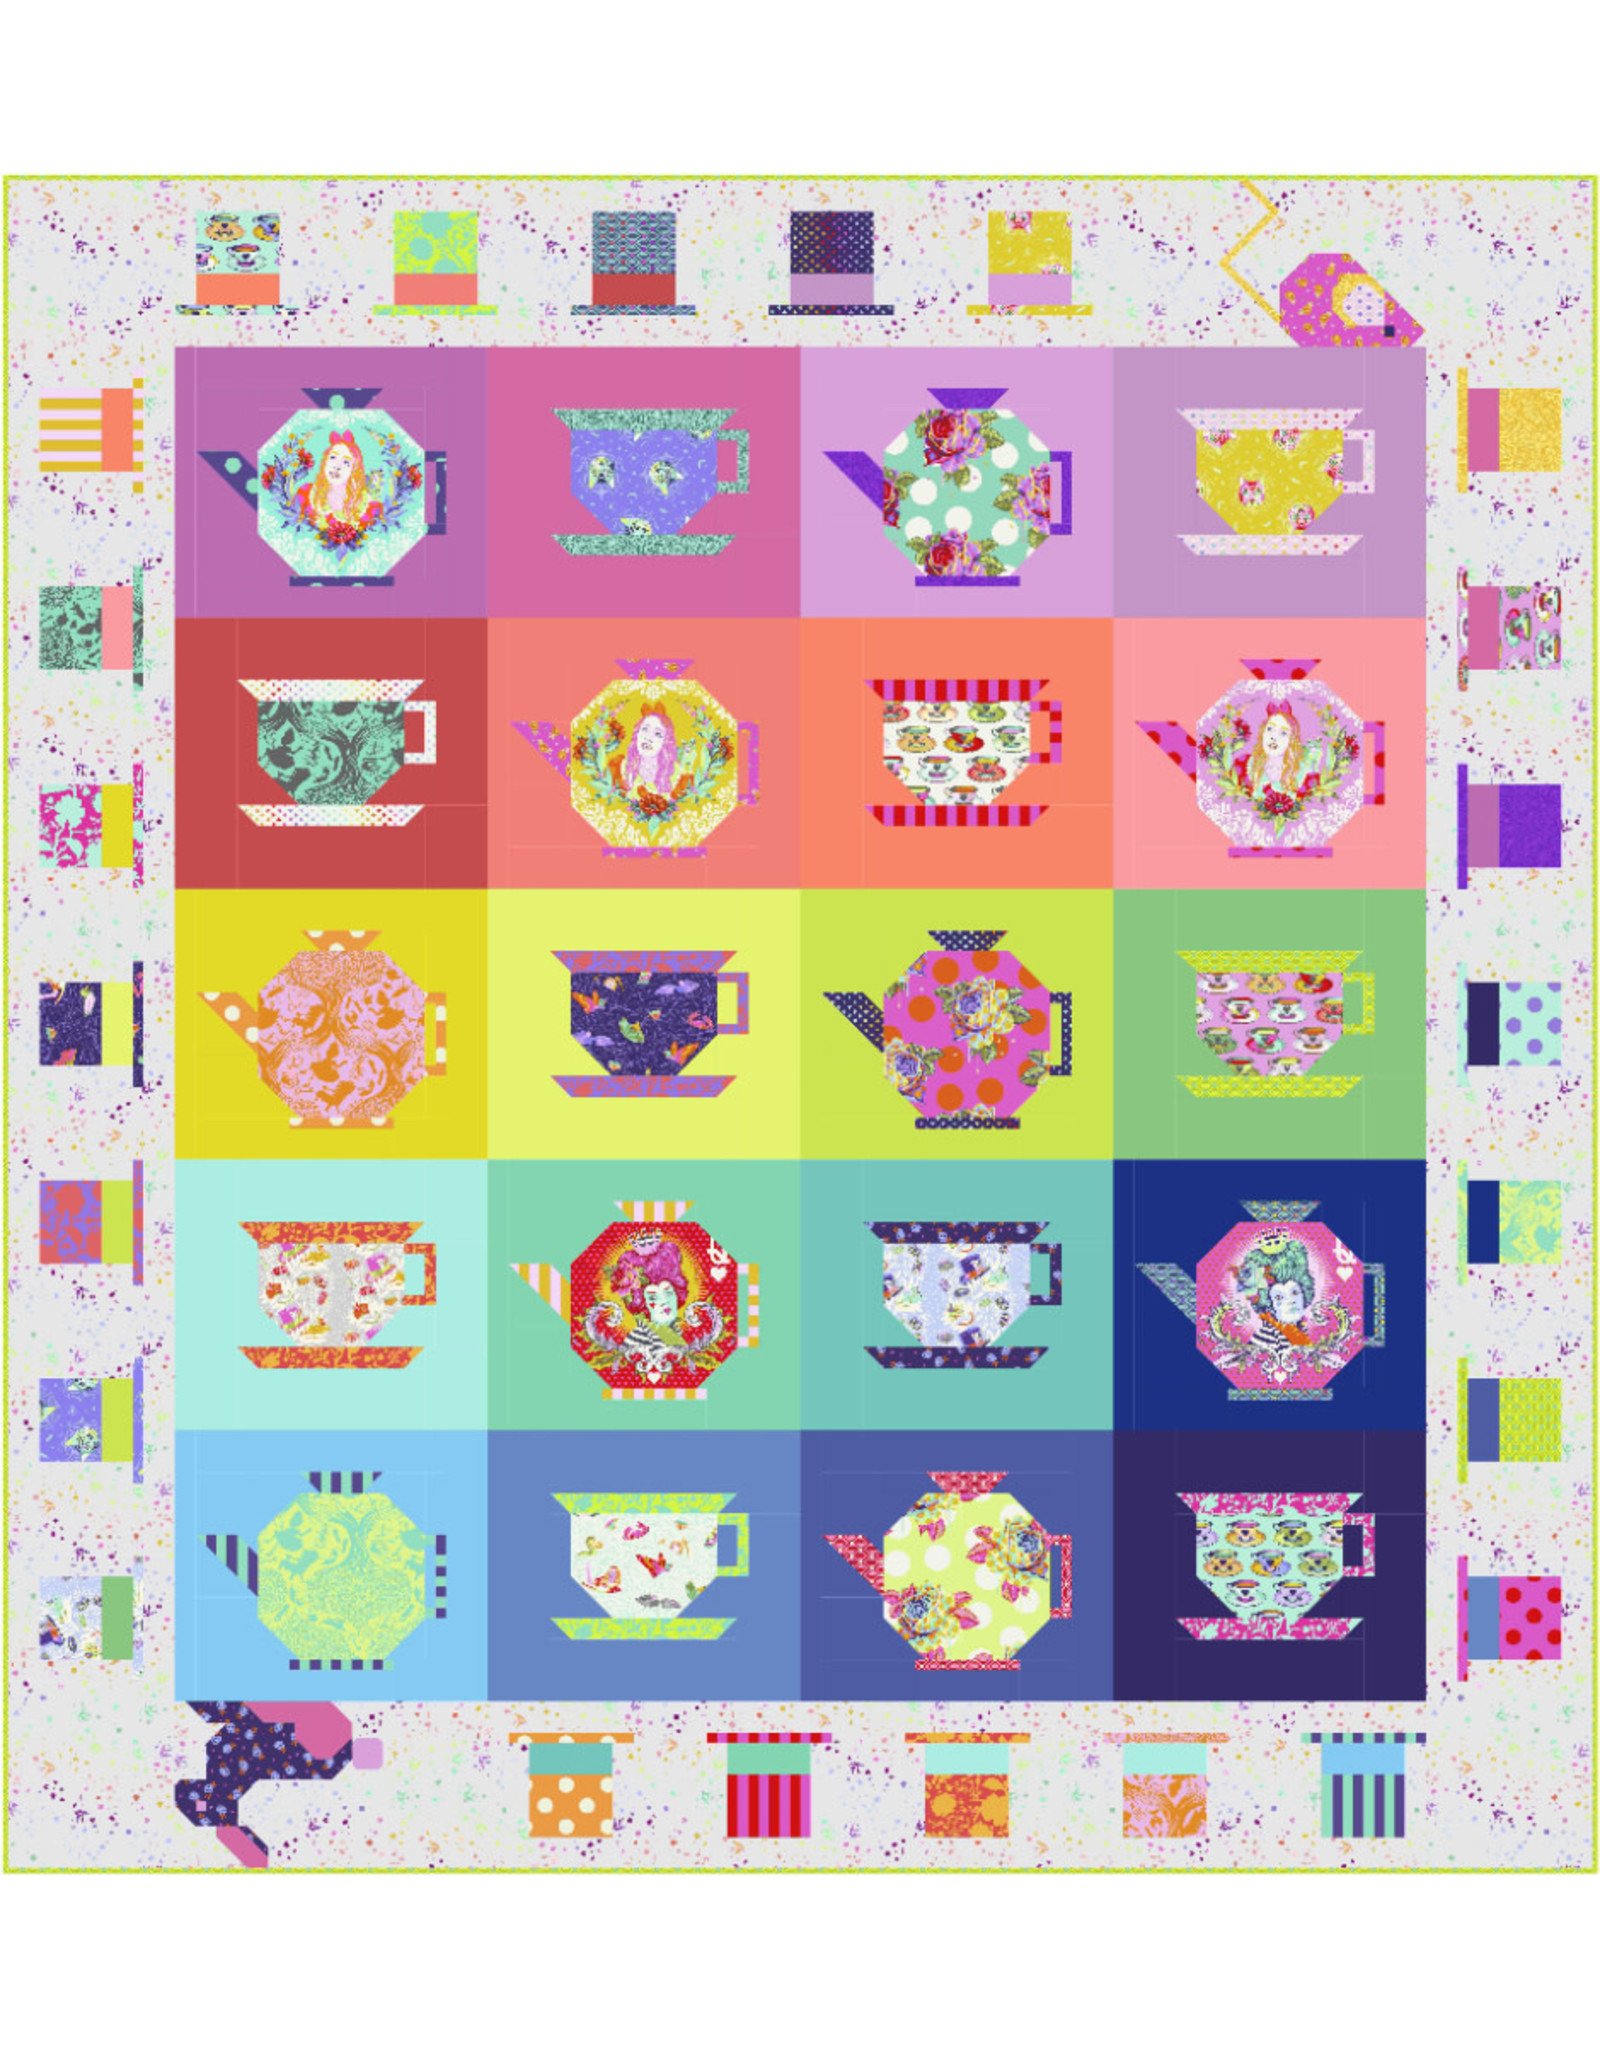 Tula Pink Mad Hatter's Tea Party Quilt Kit, from Tula Pink's Curiouser and Curiouser